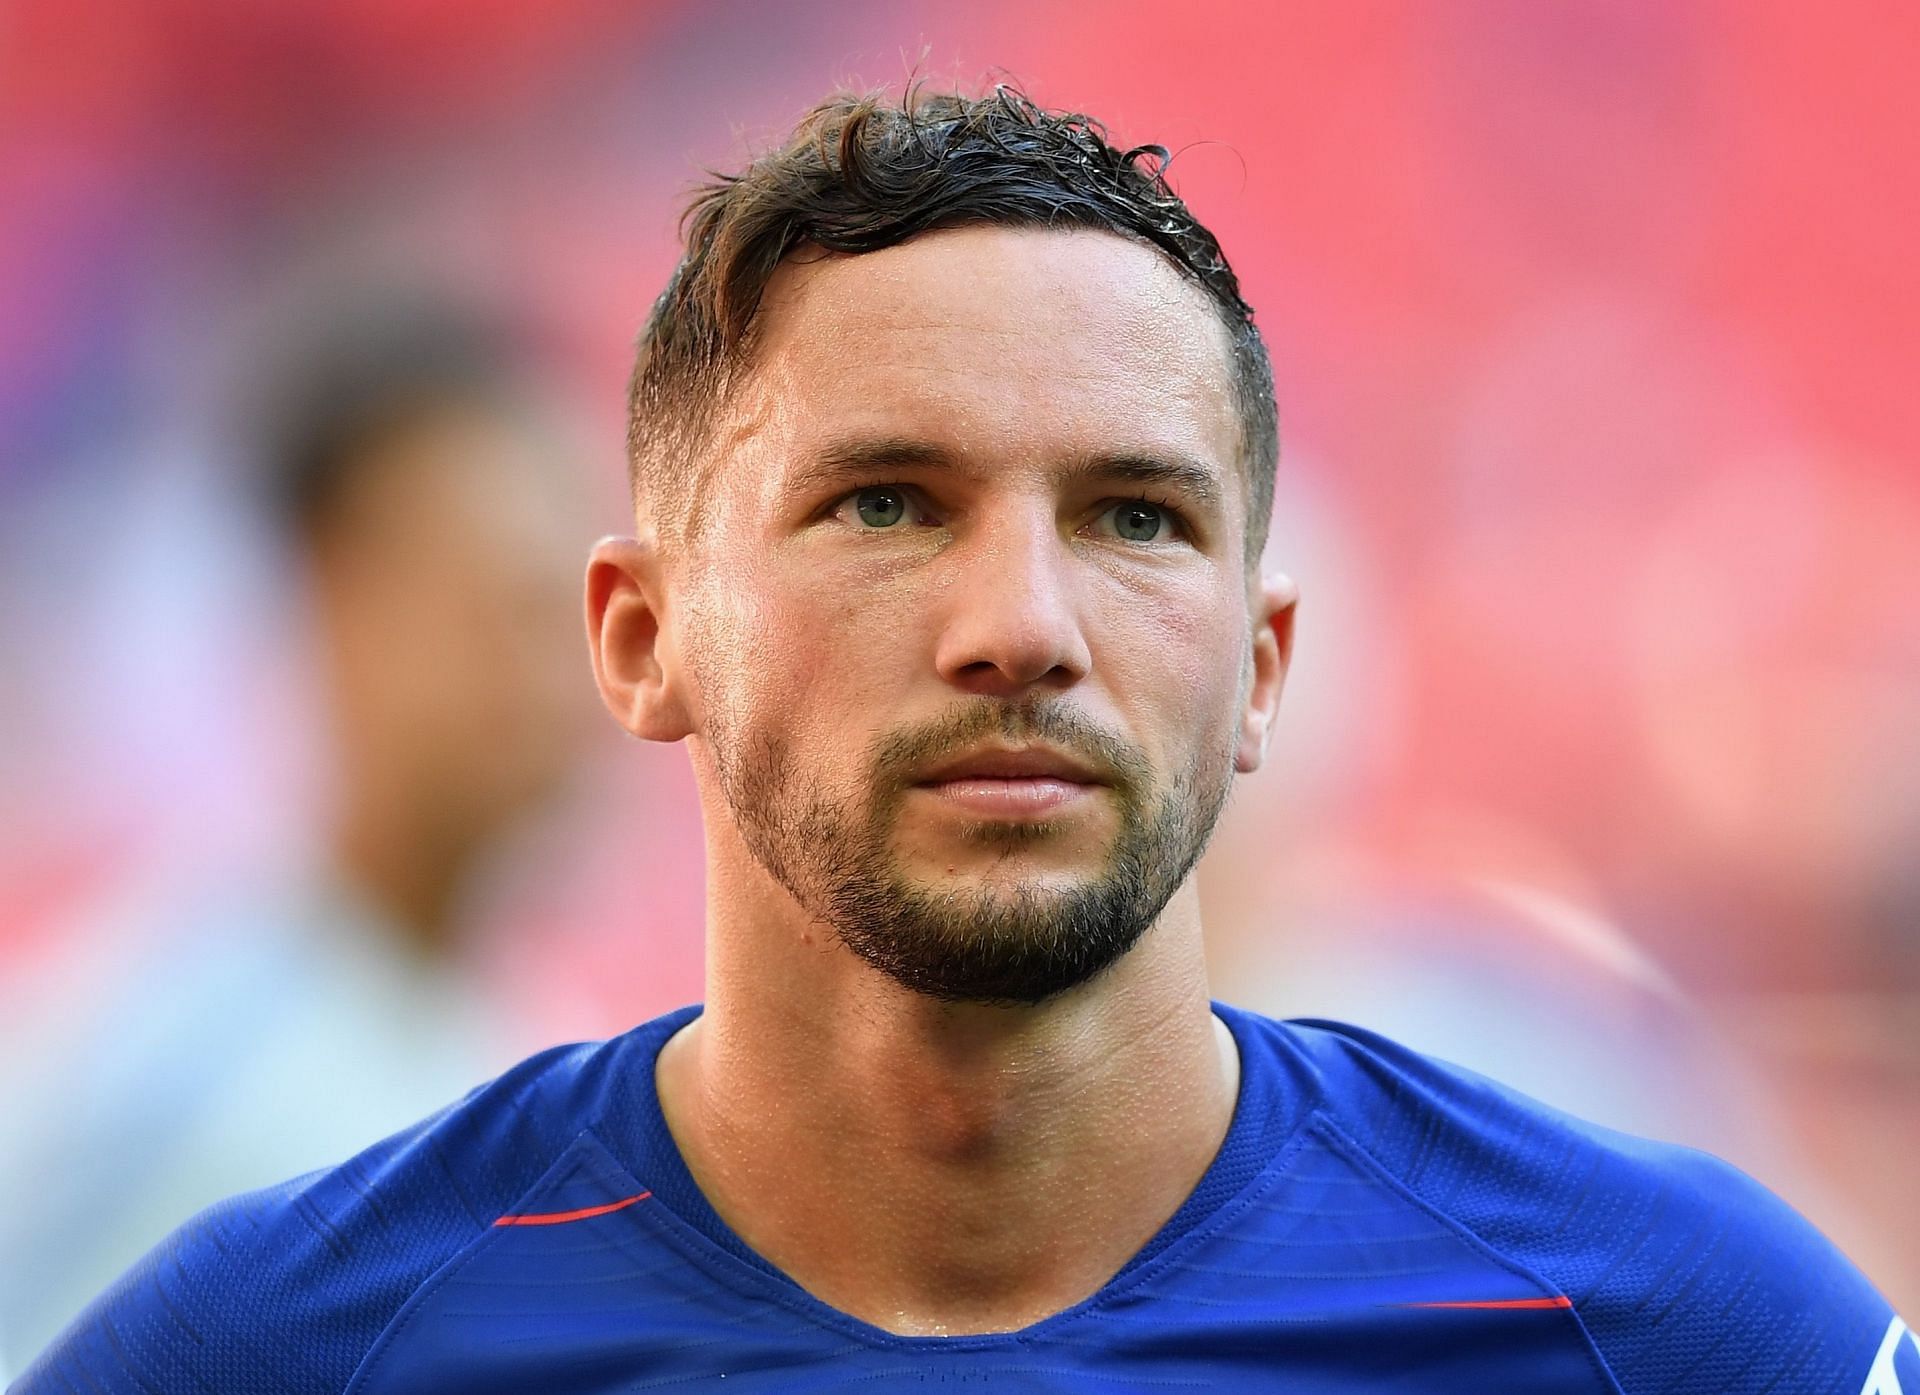 Danny Drinkwater last played for Reading Fc